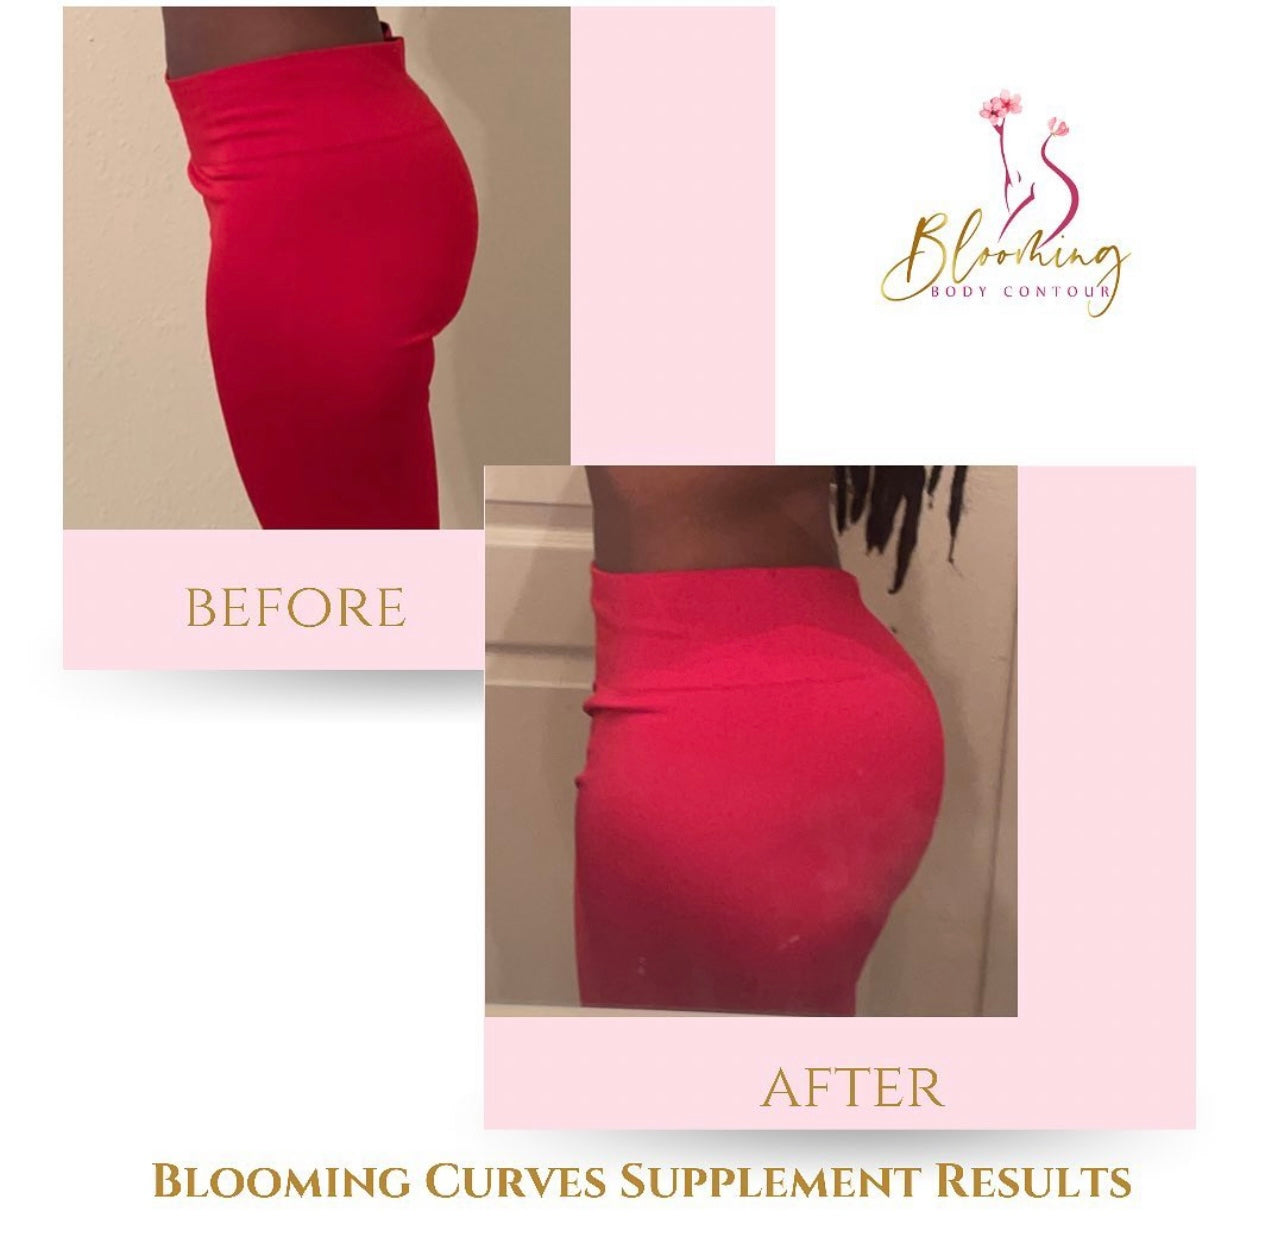 Blooming Curves – Blooming Body Contour